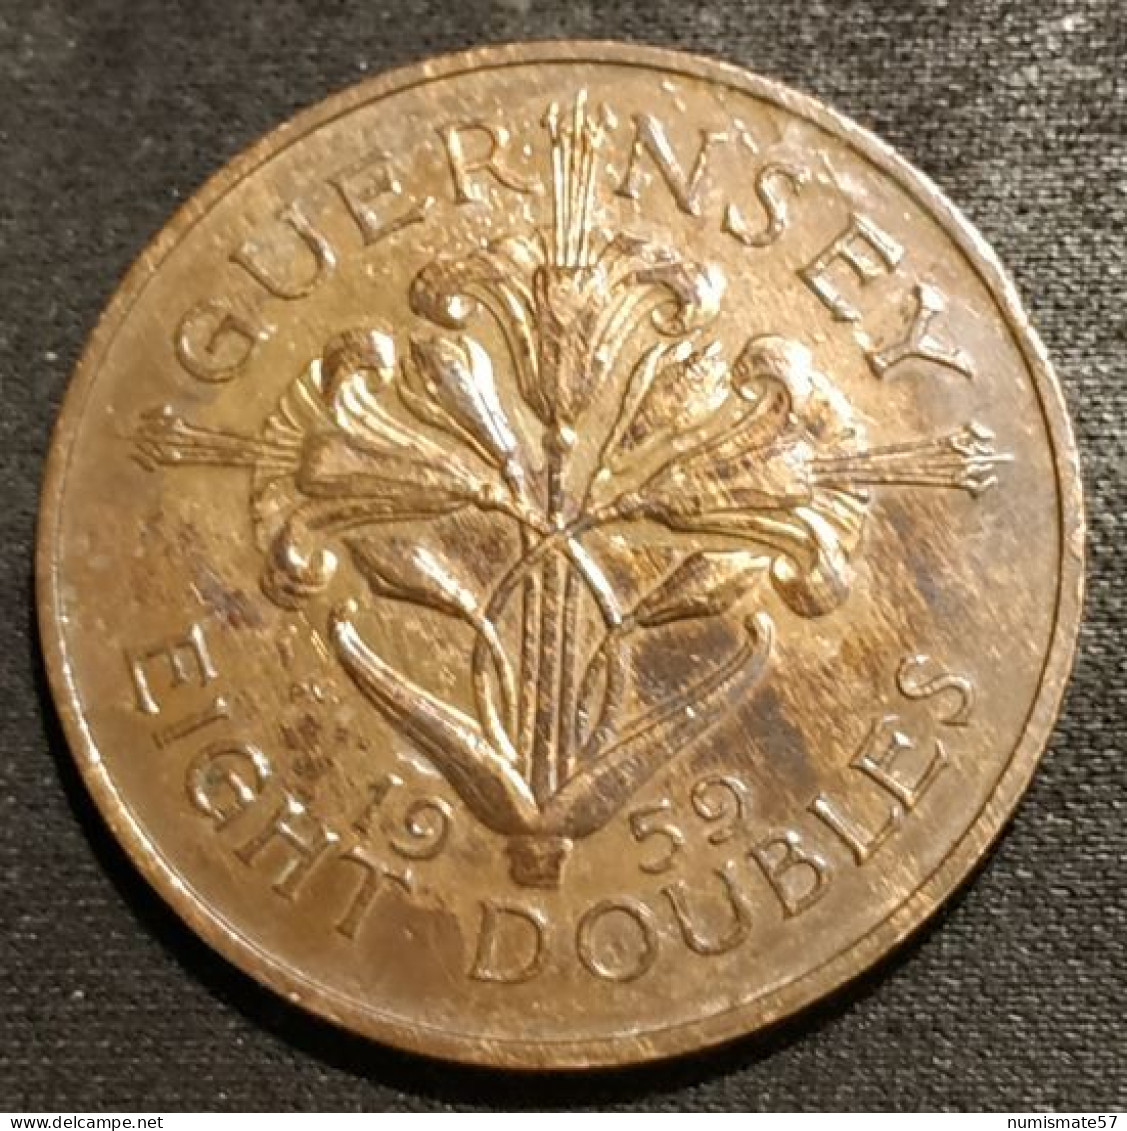 Pas Courant - GUERNESEY - 8 DOUBLES 1959 - KM 16 - GUERNSEY - Guernsey